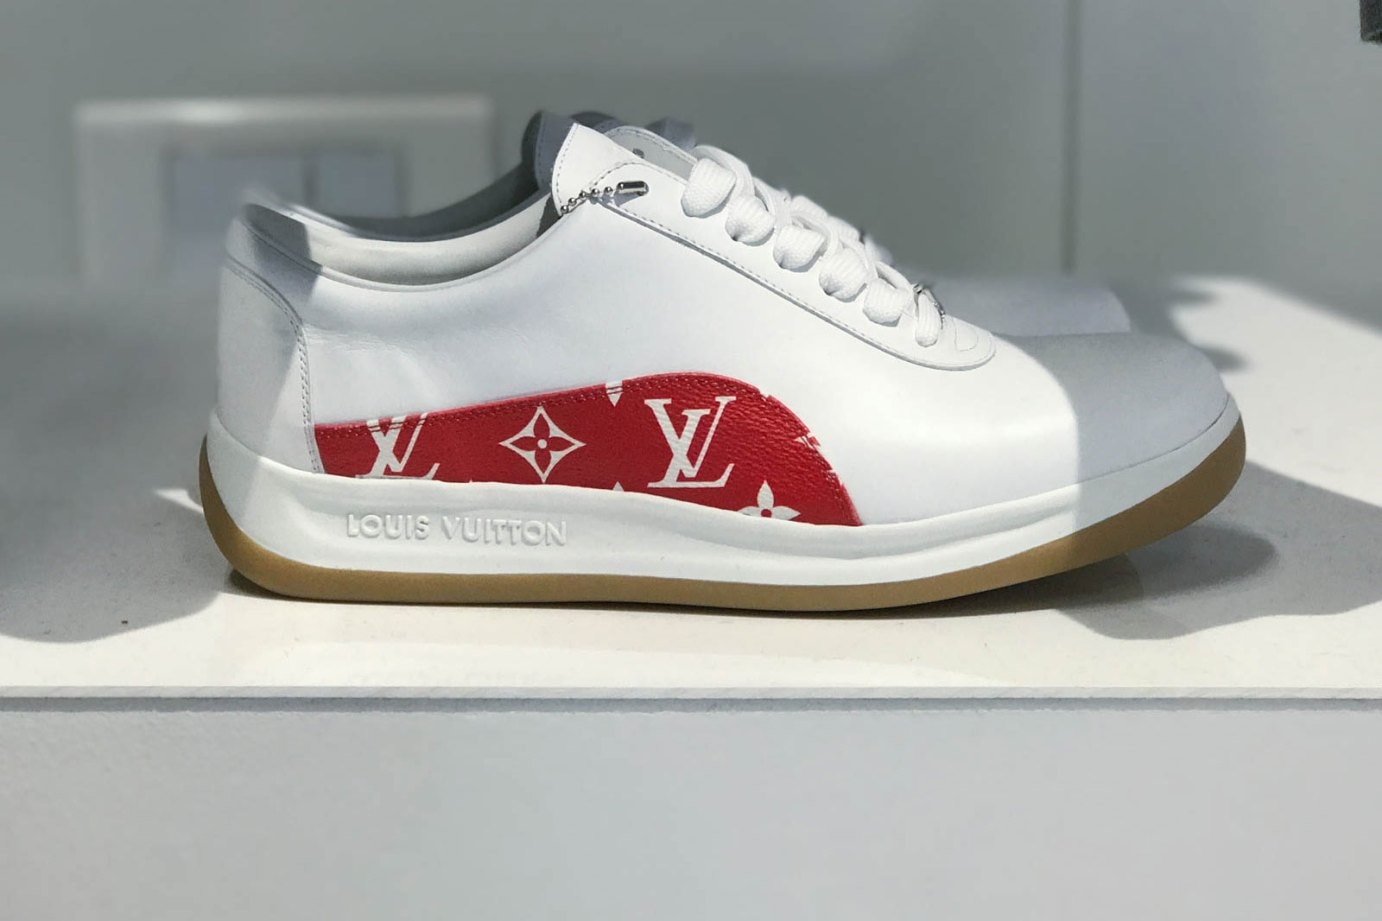 Supreme x Louis Vuitton 2017 Fall/Winter Collection Showroom Closer Look